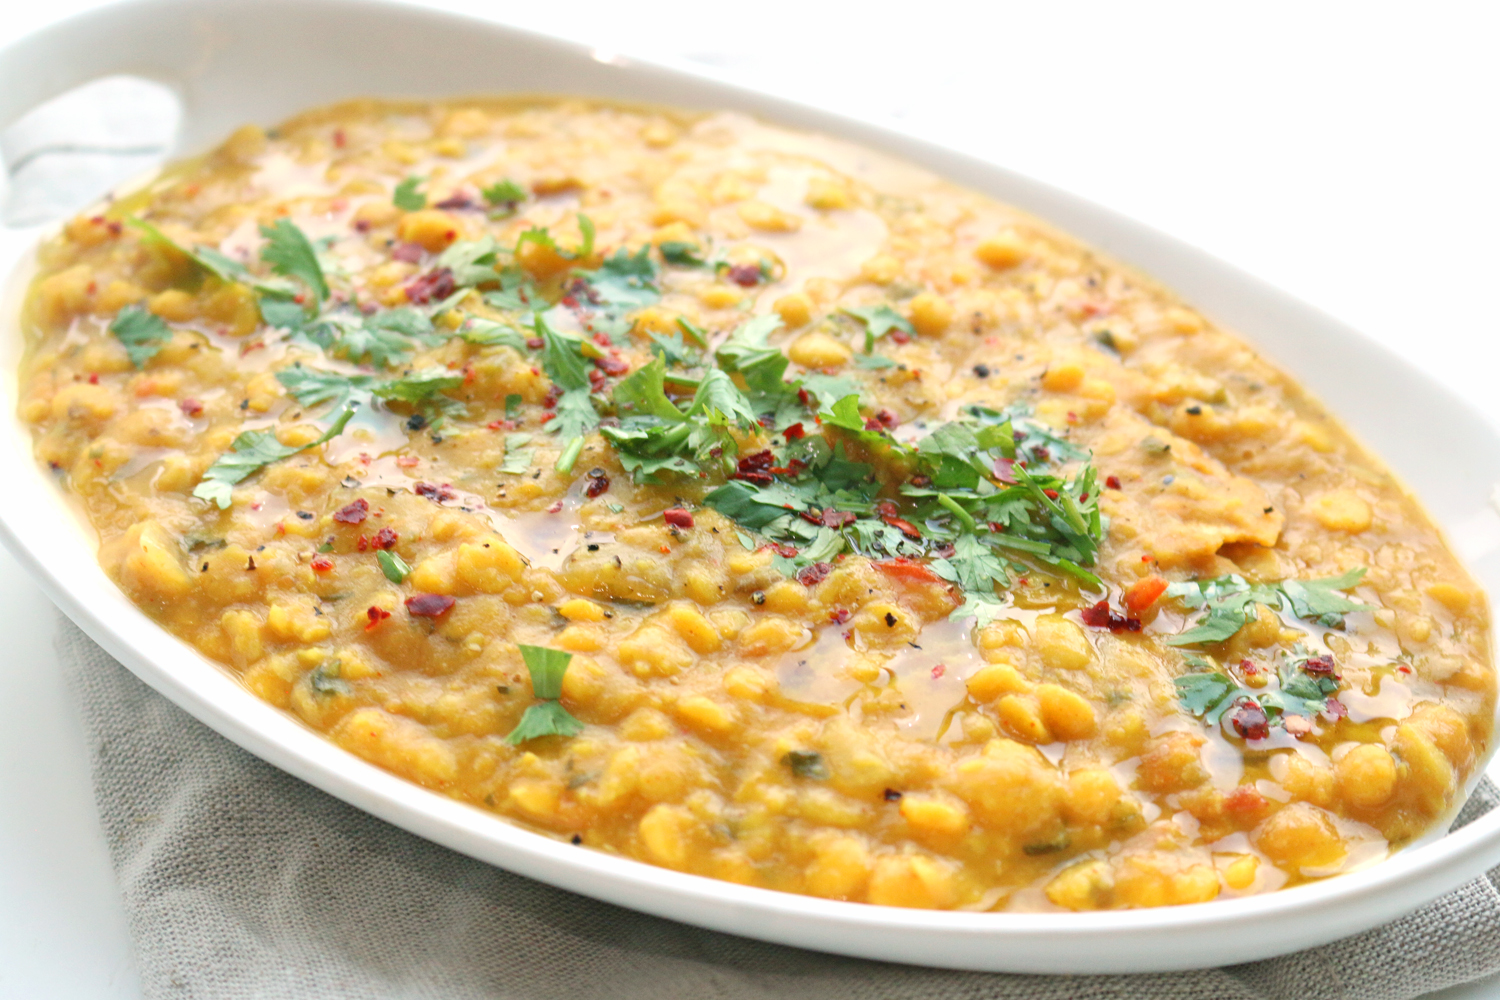 Dal tadka made in Dhaba style, people will keep licking their fingers